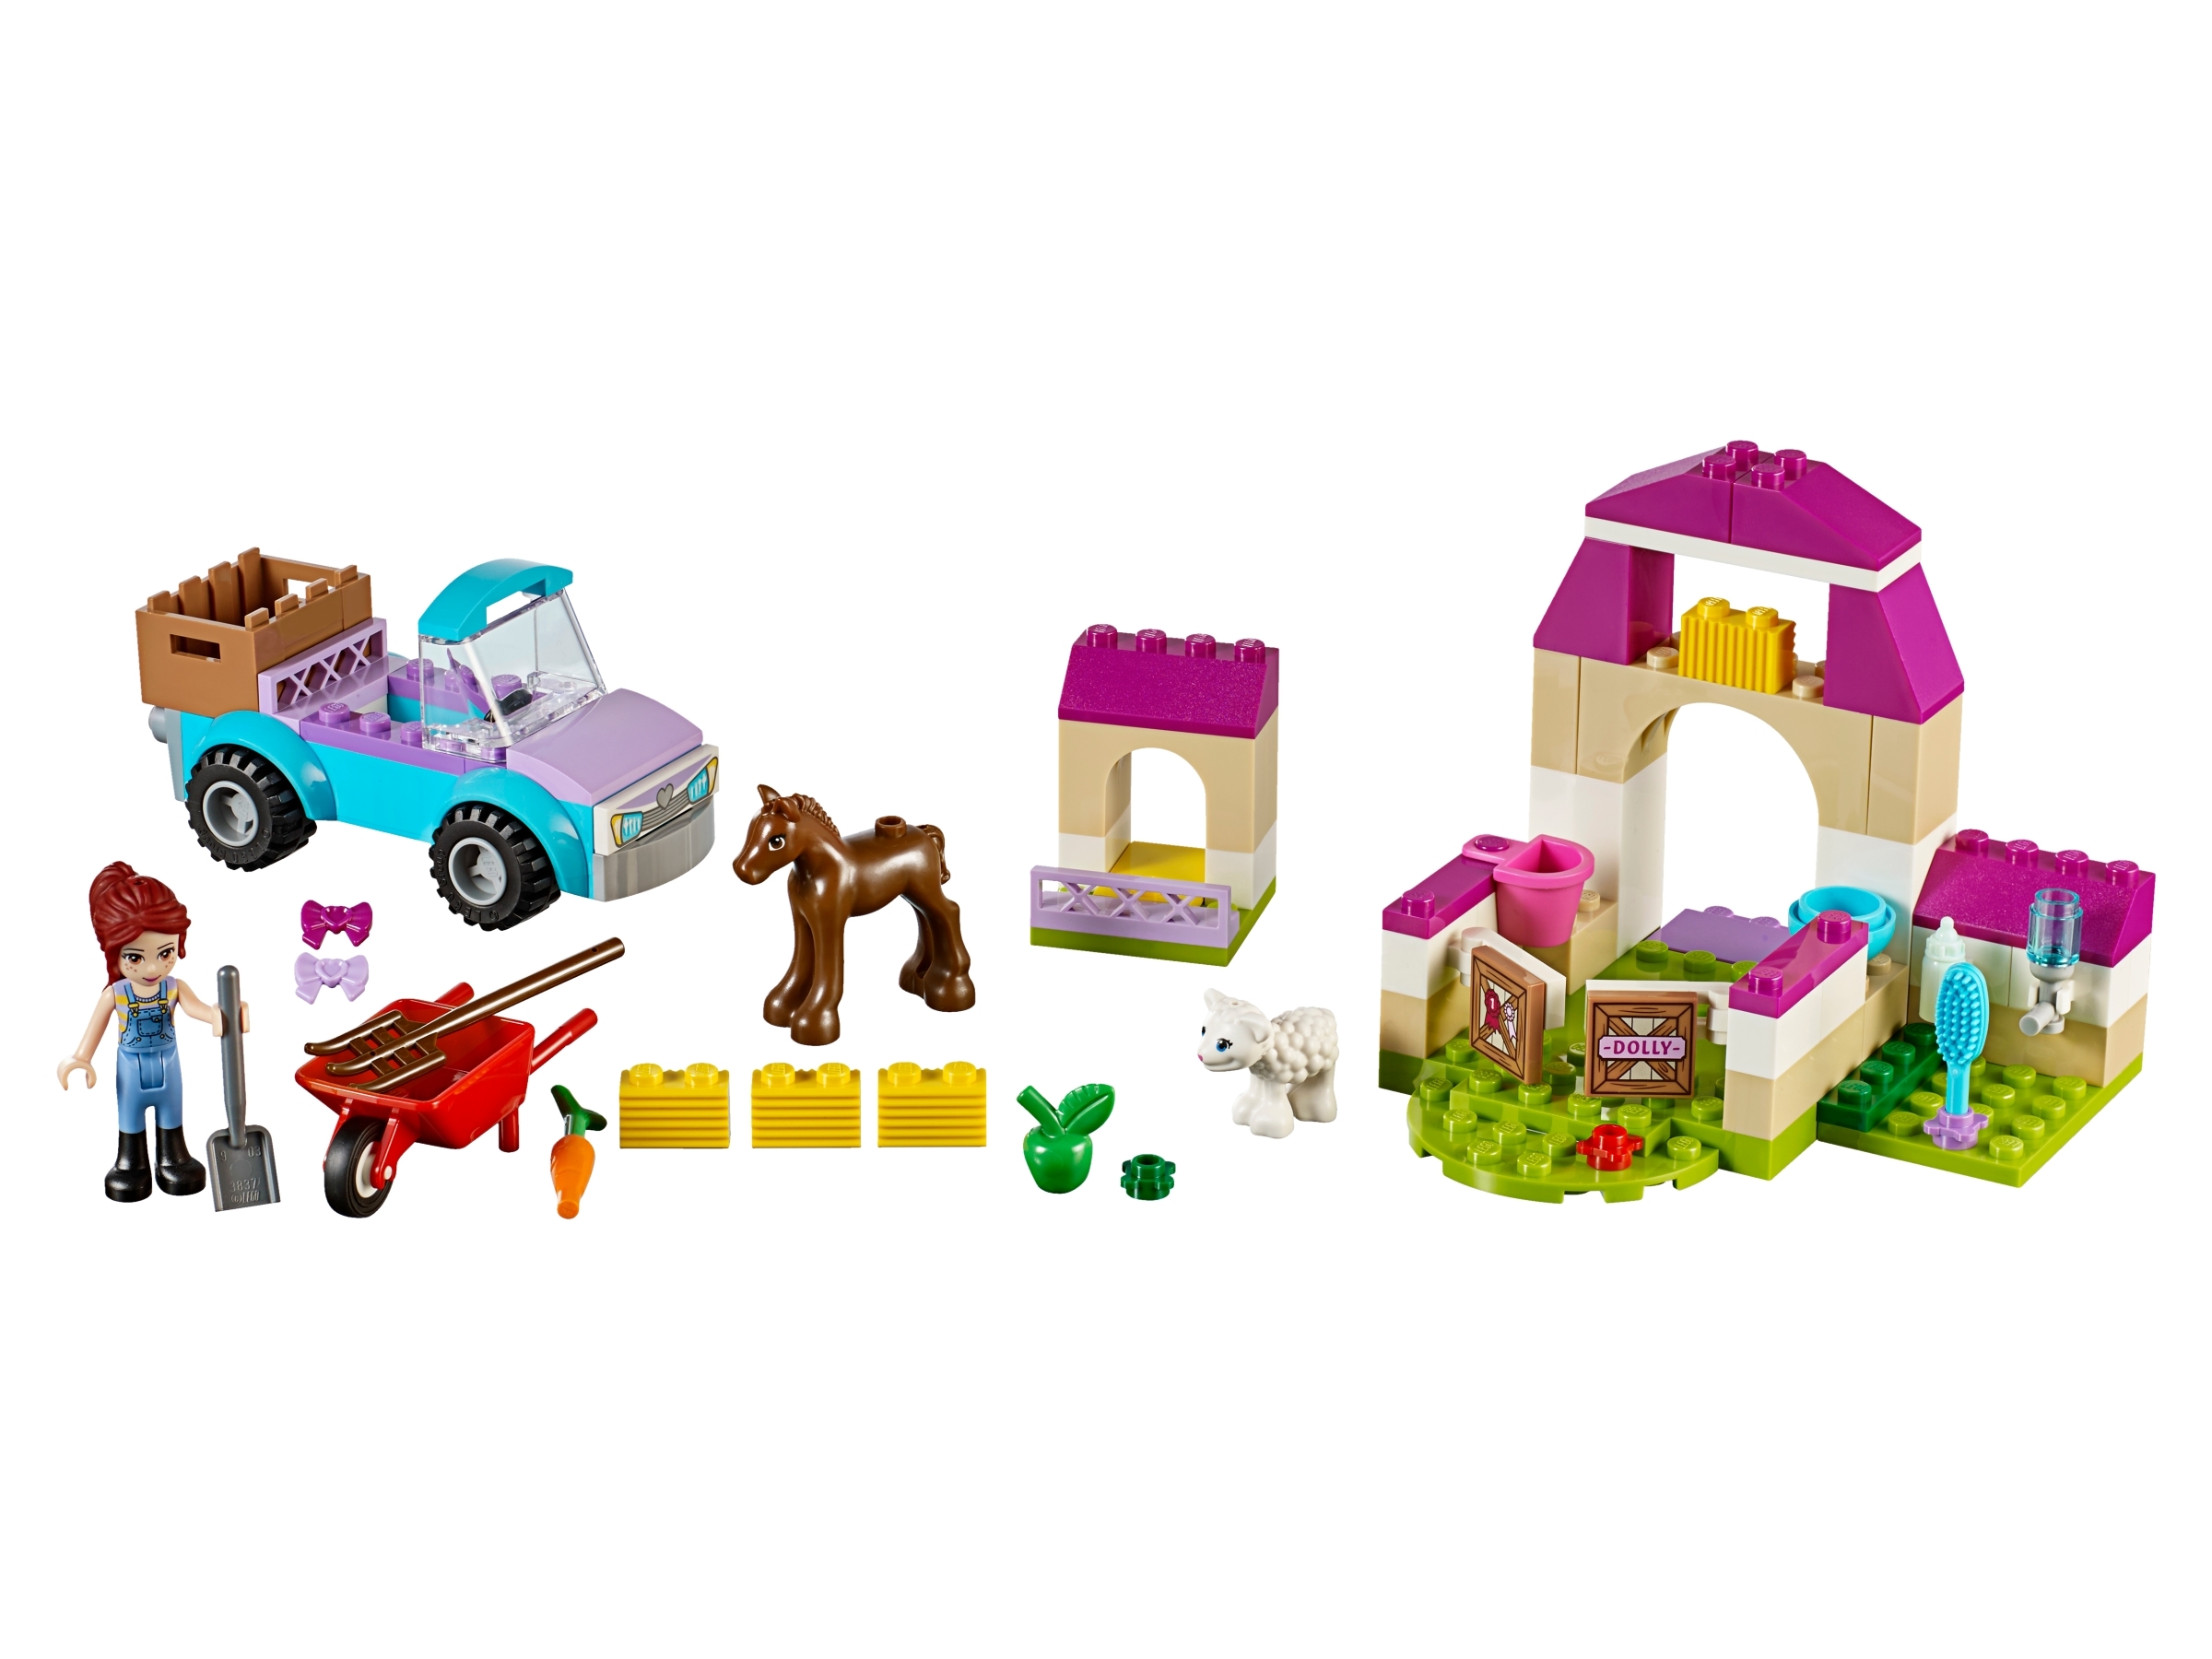 Mia's Farm Suitcase 10746 | Juniors | Buy online at the Official